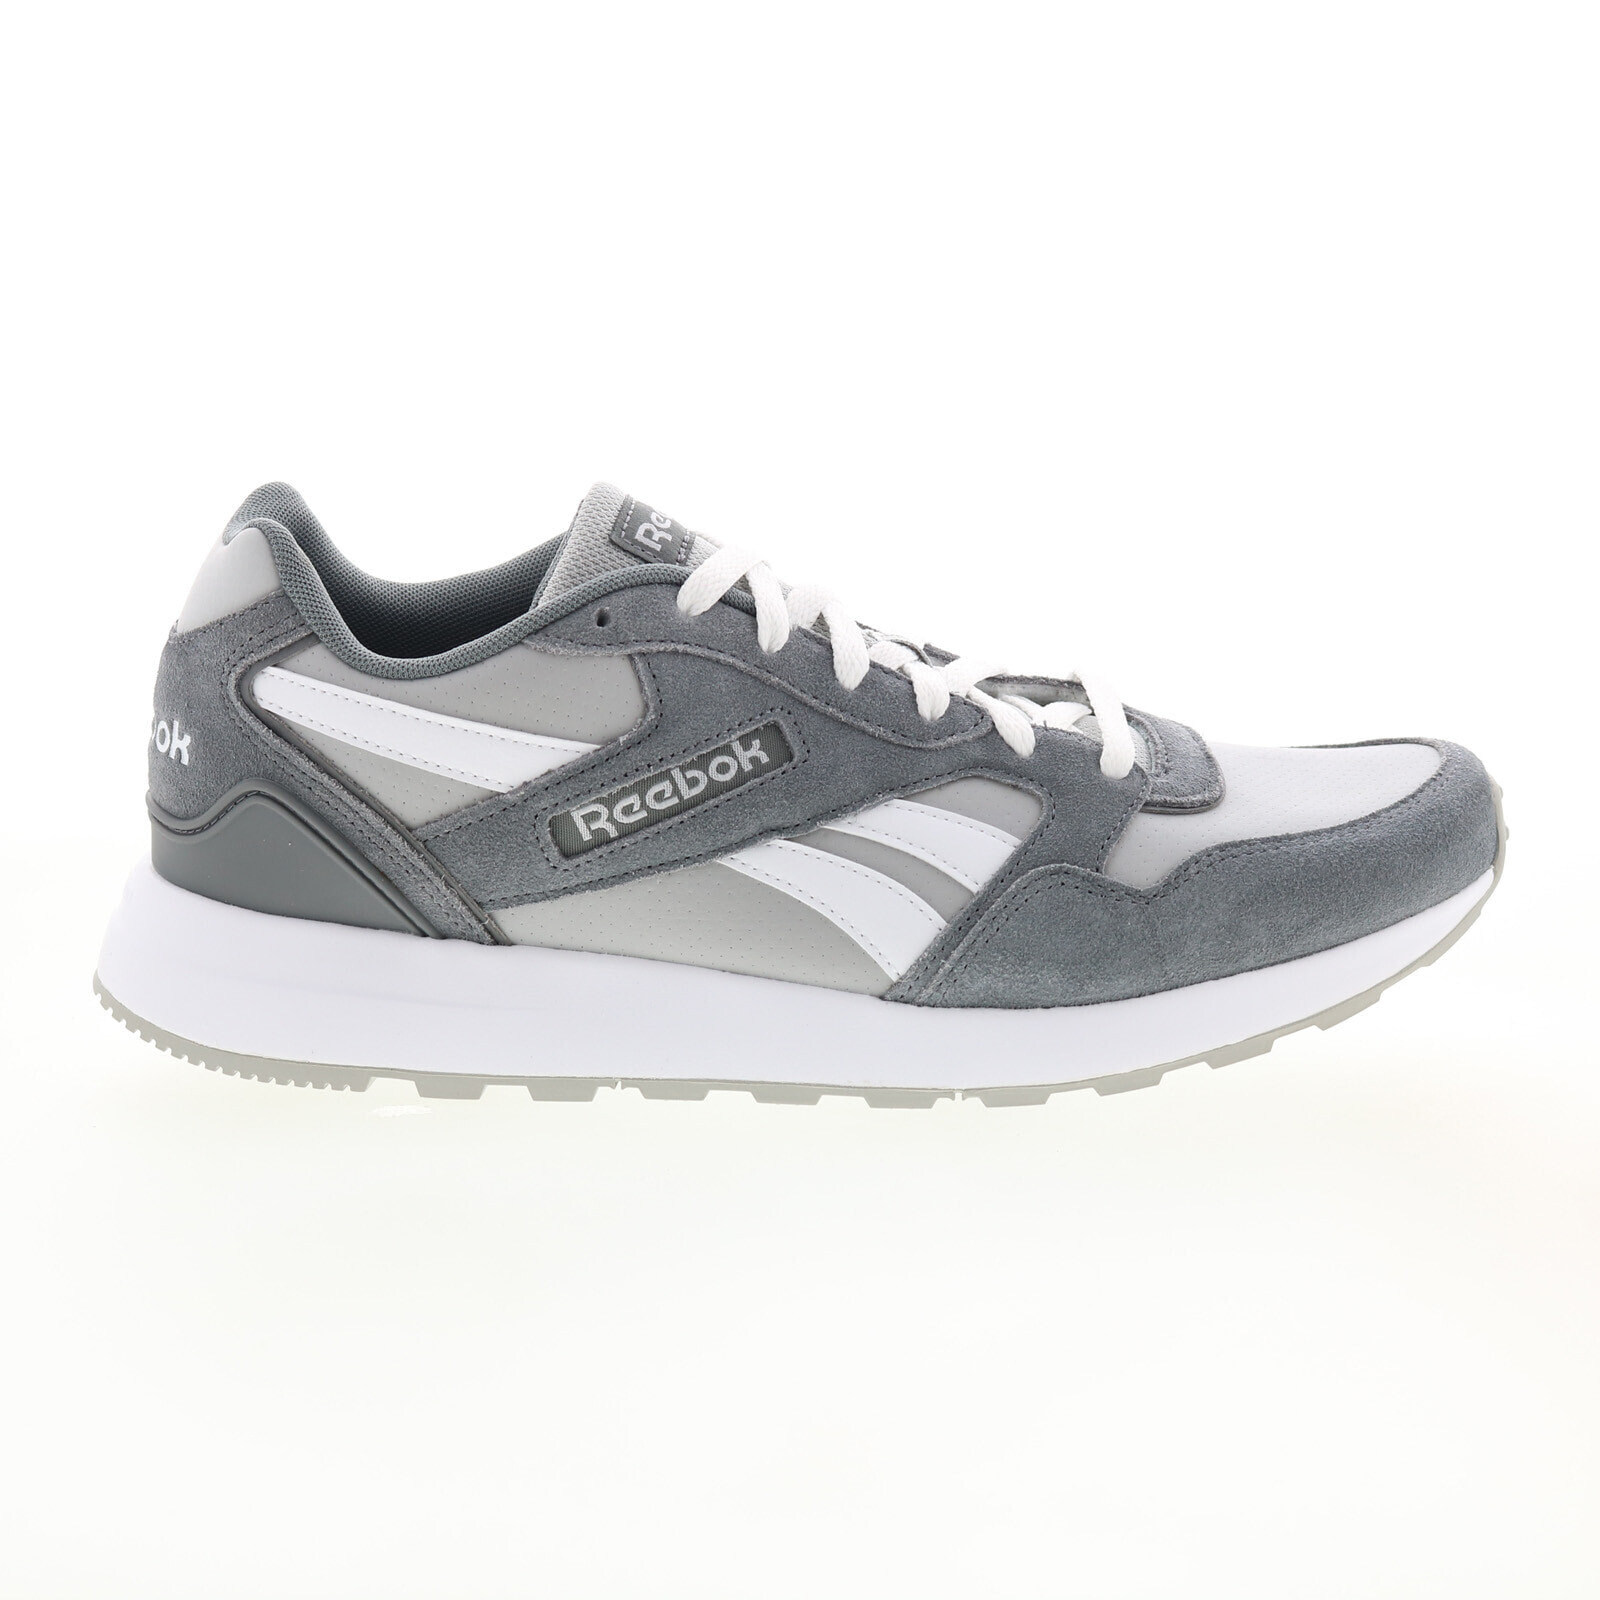 Reebok GL 1000 Leather GW4669 Mens Gray Suede Lifestyle Sneakers Shoes